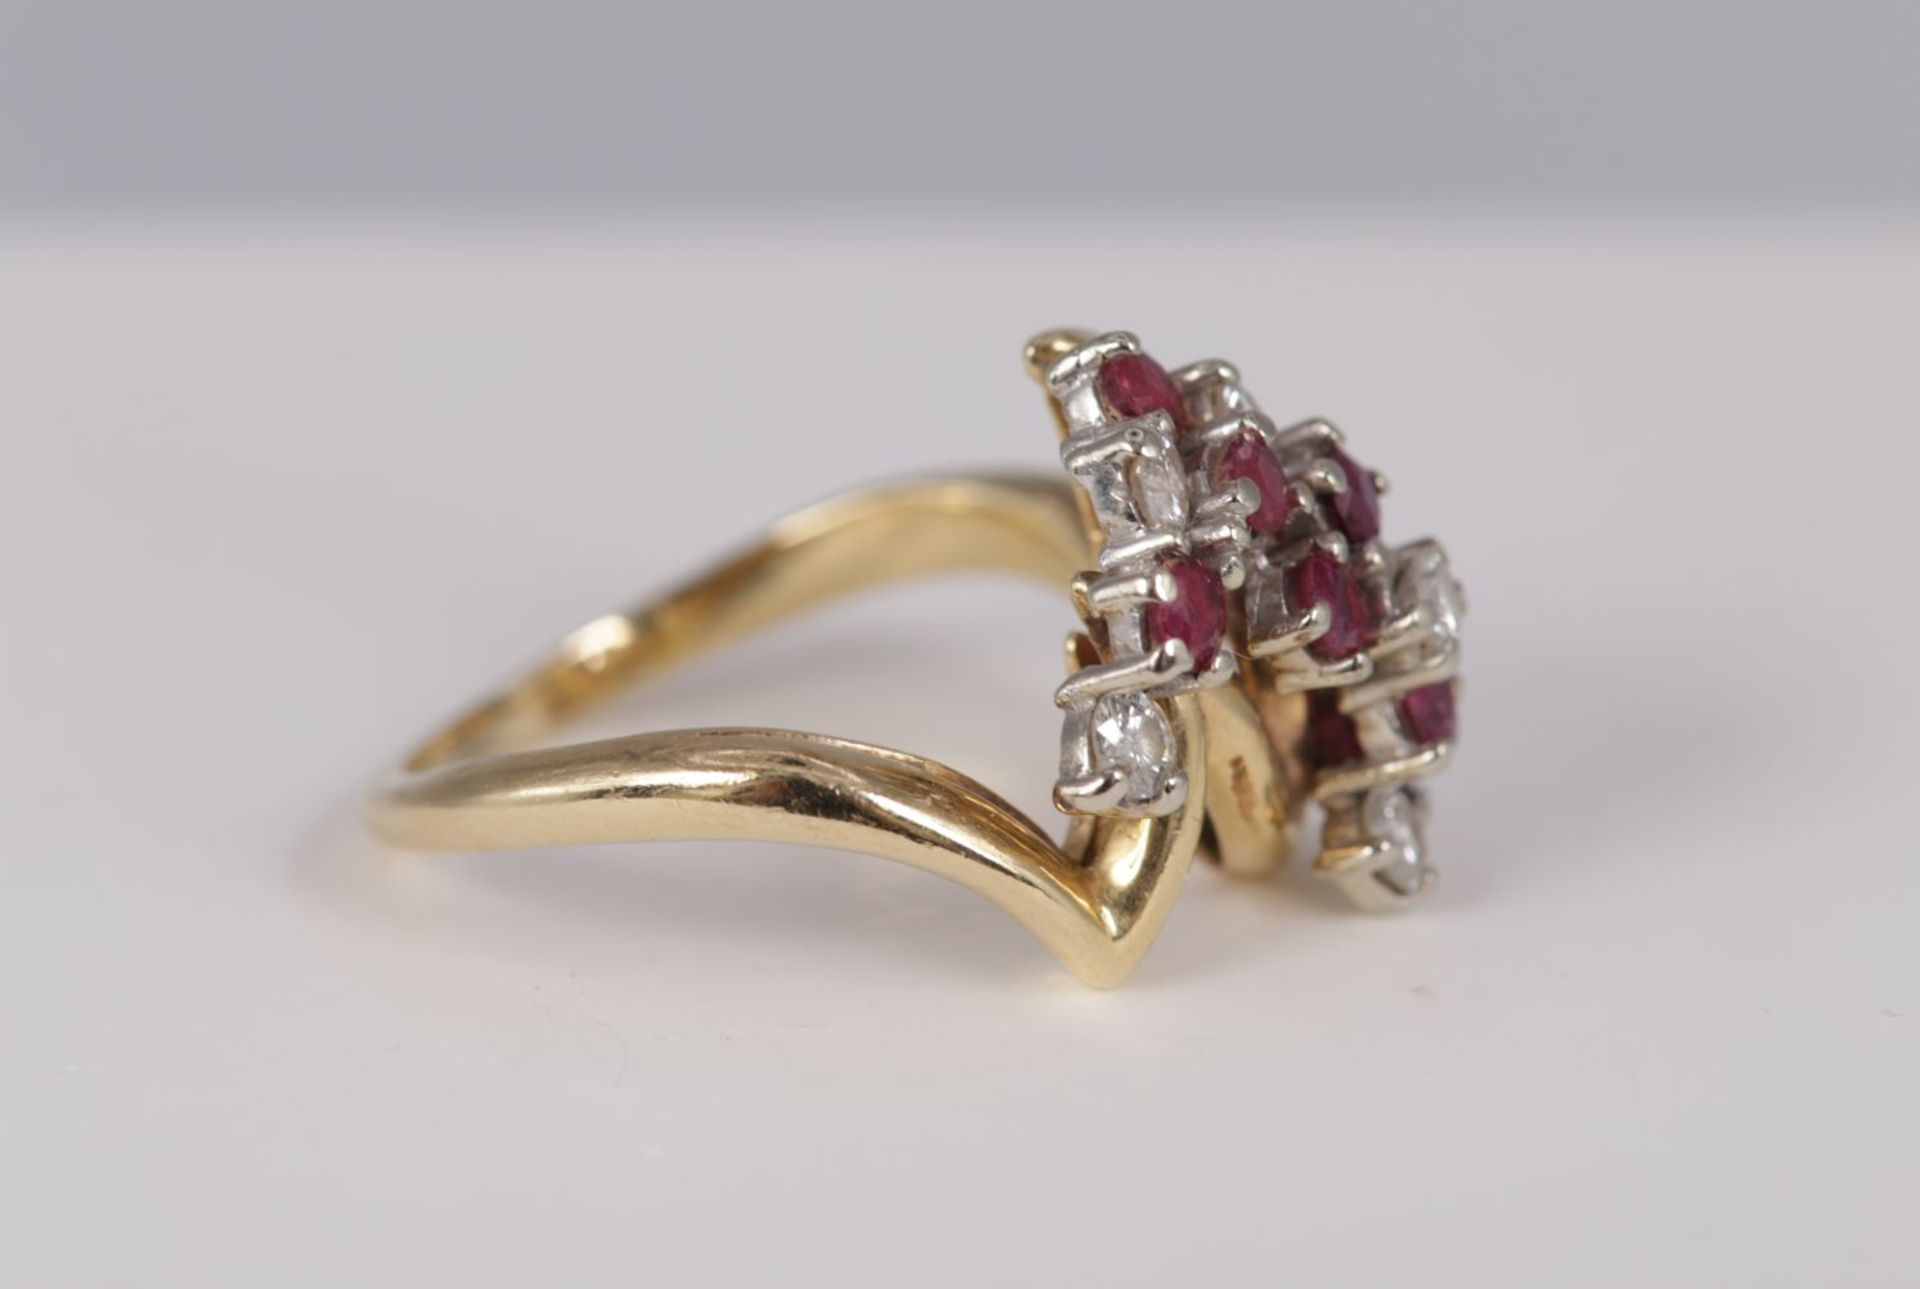 14K GOLD, DIAMOND AND RUBY RING - Image 3 of 4